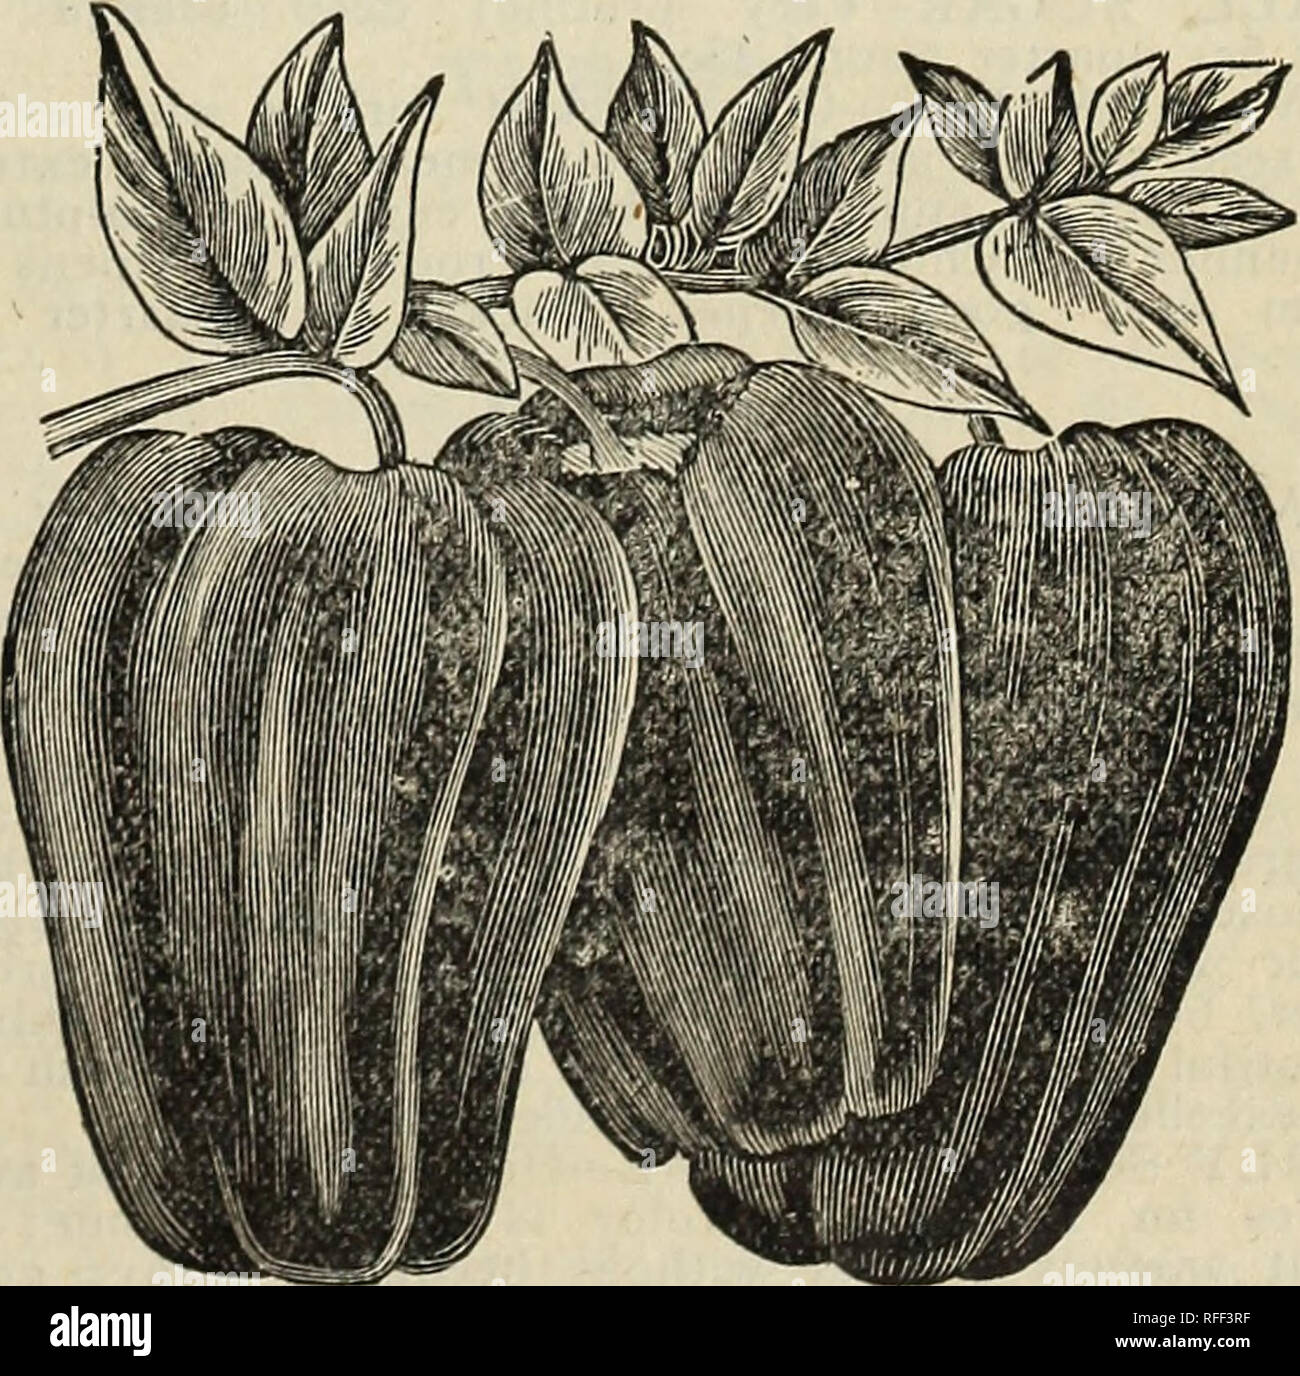 . Drumm Seed and Floral Company. Nursery stock Texas Fort Worth Catalogs; Vegetables Seeds Catalogs; Flowers Catalogs; Plants, Ornamental Catalogs; Fruit Catalogs. f^XTRA EARLY PREMIUM GEM—Very fine dwarf pea of little gem type, on which it is a decided improvement; larapr pods, more productive. Packet 10c; pint 25c; quart 45. ;1':NTTSH INVICTA—About five days later than the )aniel O'Rourke; pods of fine green color. Packet 10c; pint 25c; quart 45c. &gt;1^LUE L5EAUTY PEA—Its distinctive feature is its unu- 4^ually regular habit of growth. Height 1 3-4 feet. It is a blue, round !)ea. Price post Stock Photo